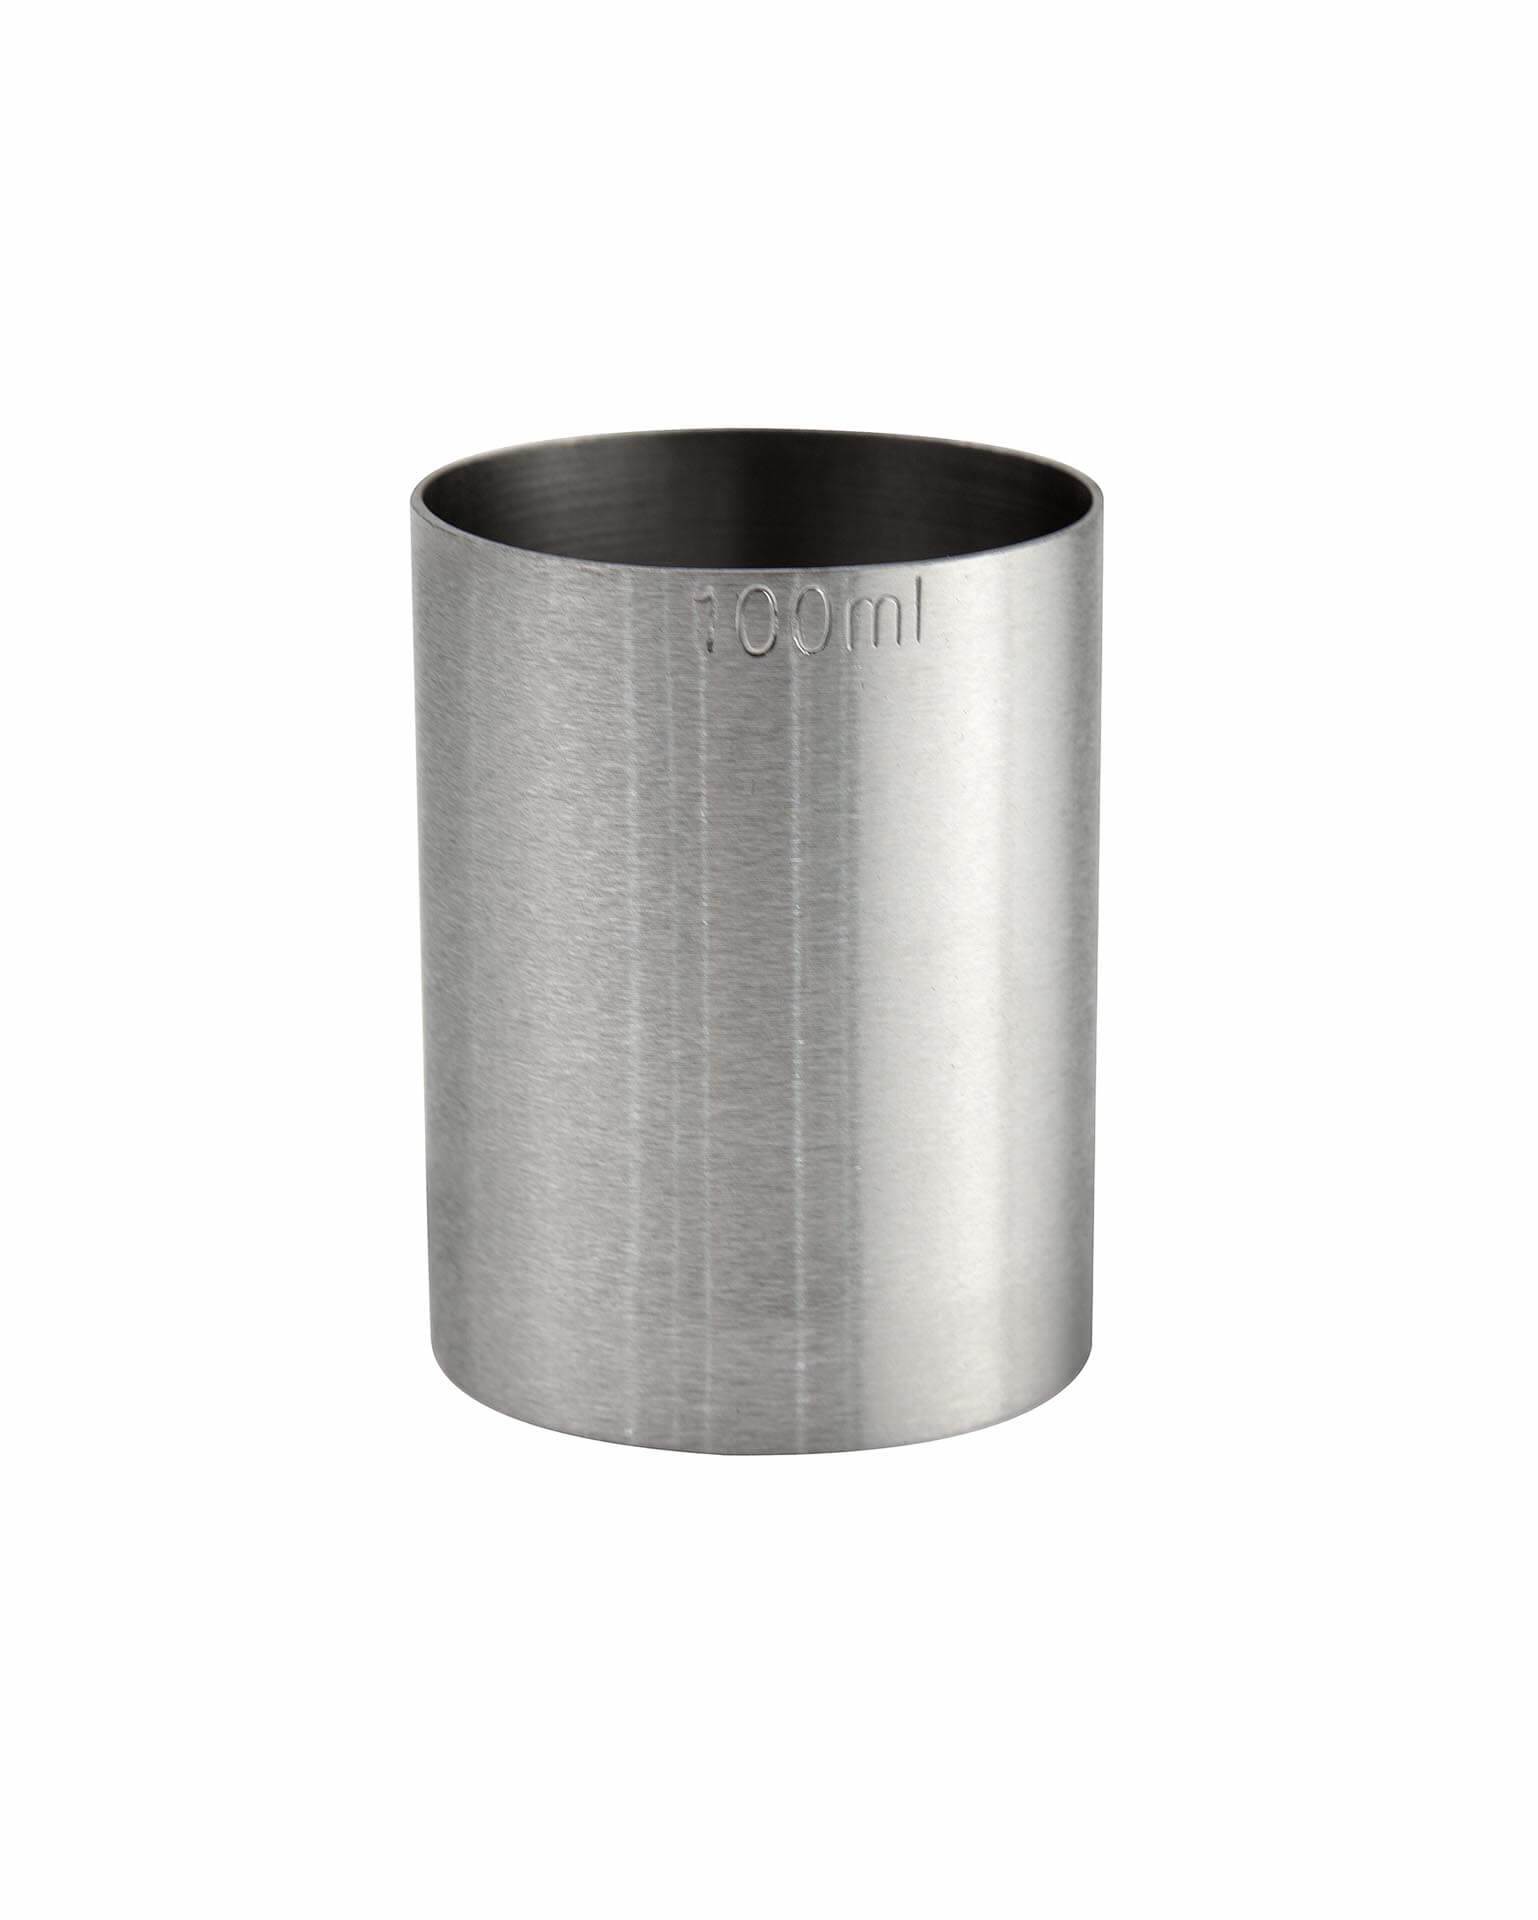 BEAUMONT 100ml THIMBLE MEASURE CE MARKED BAR-3183